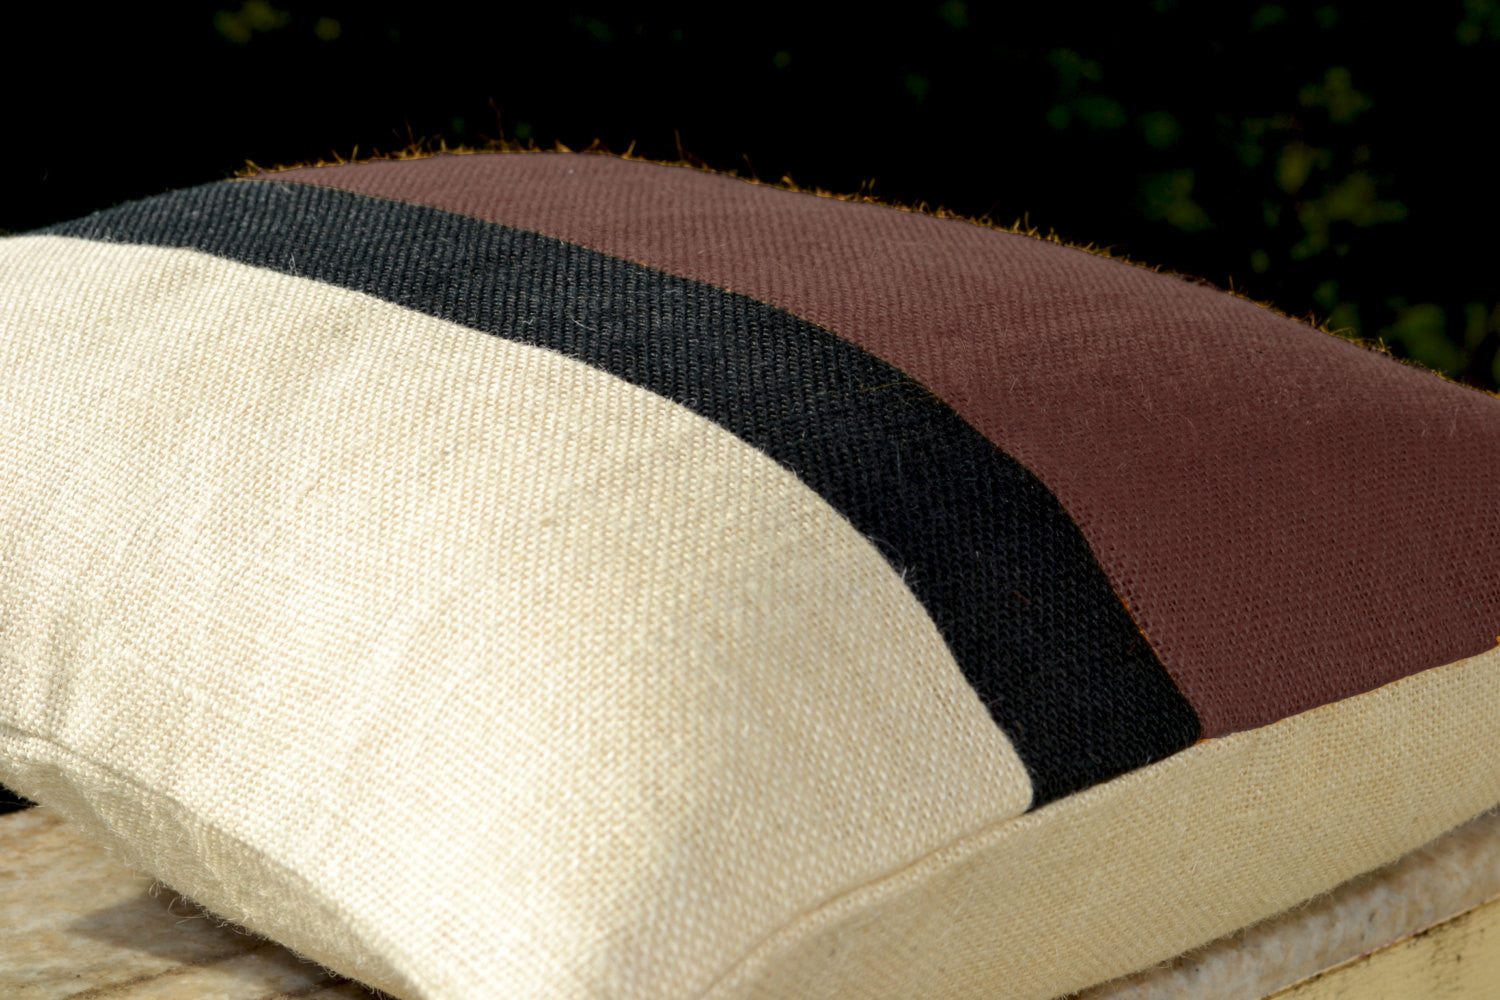 Handmade burlap taupe pillow cover with color block